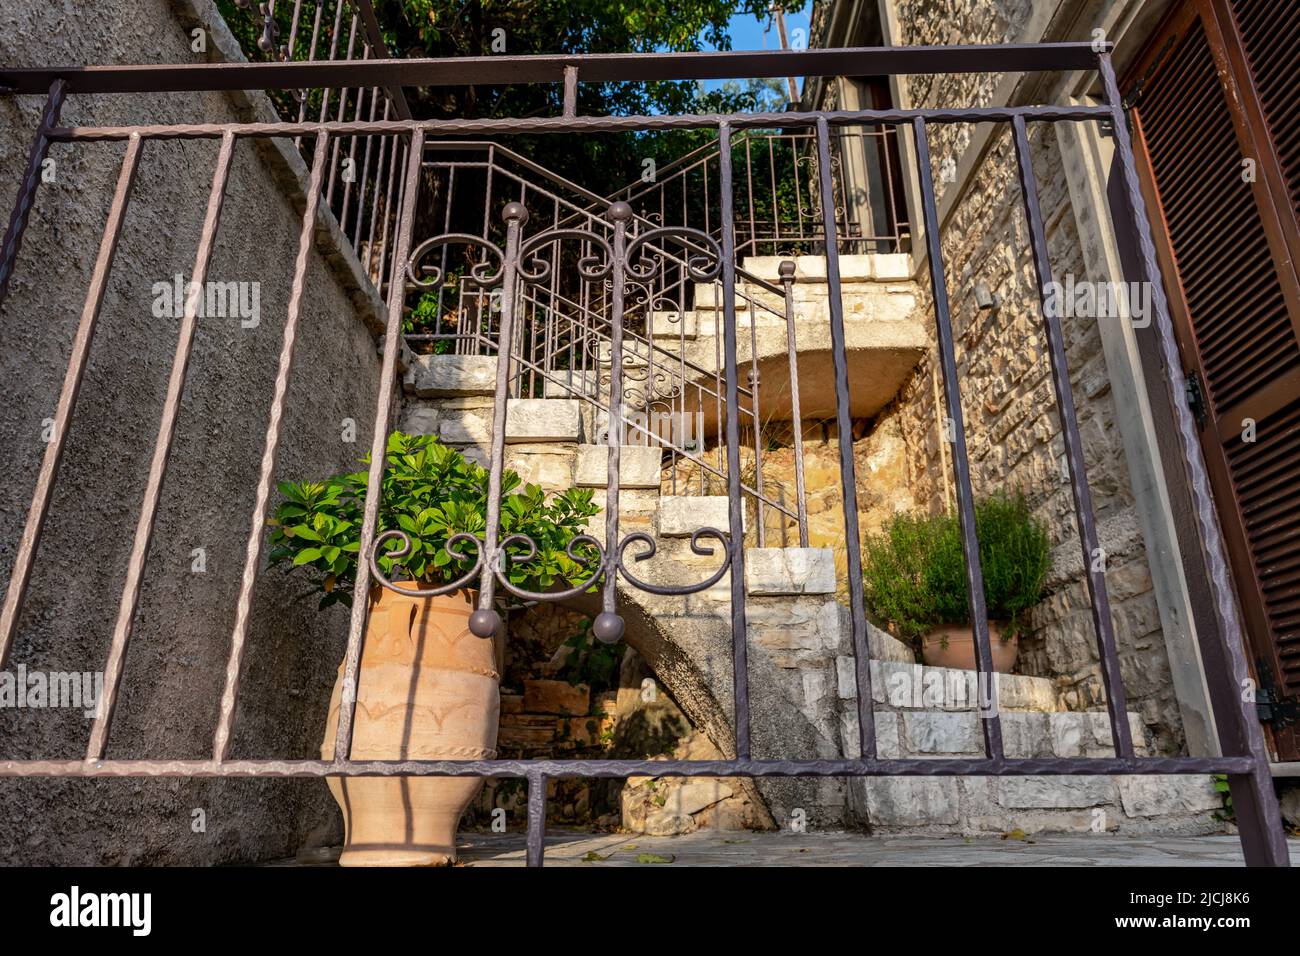 The stairs of a beautiful traditional stone house on Ithaca Island, Greece, decorated with pot plants. Stock Photo